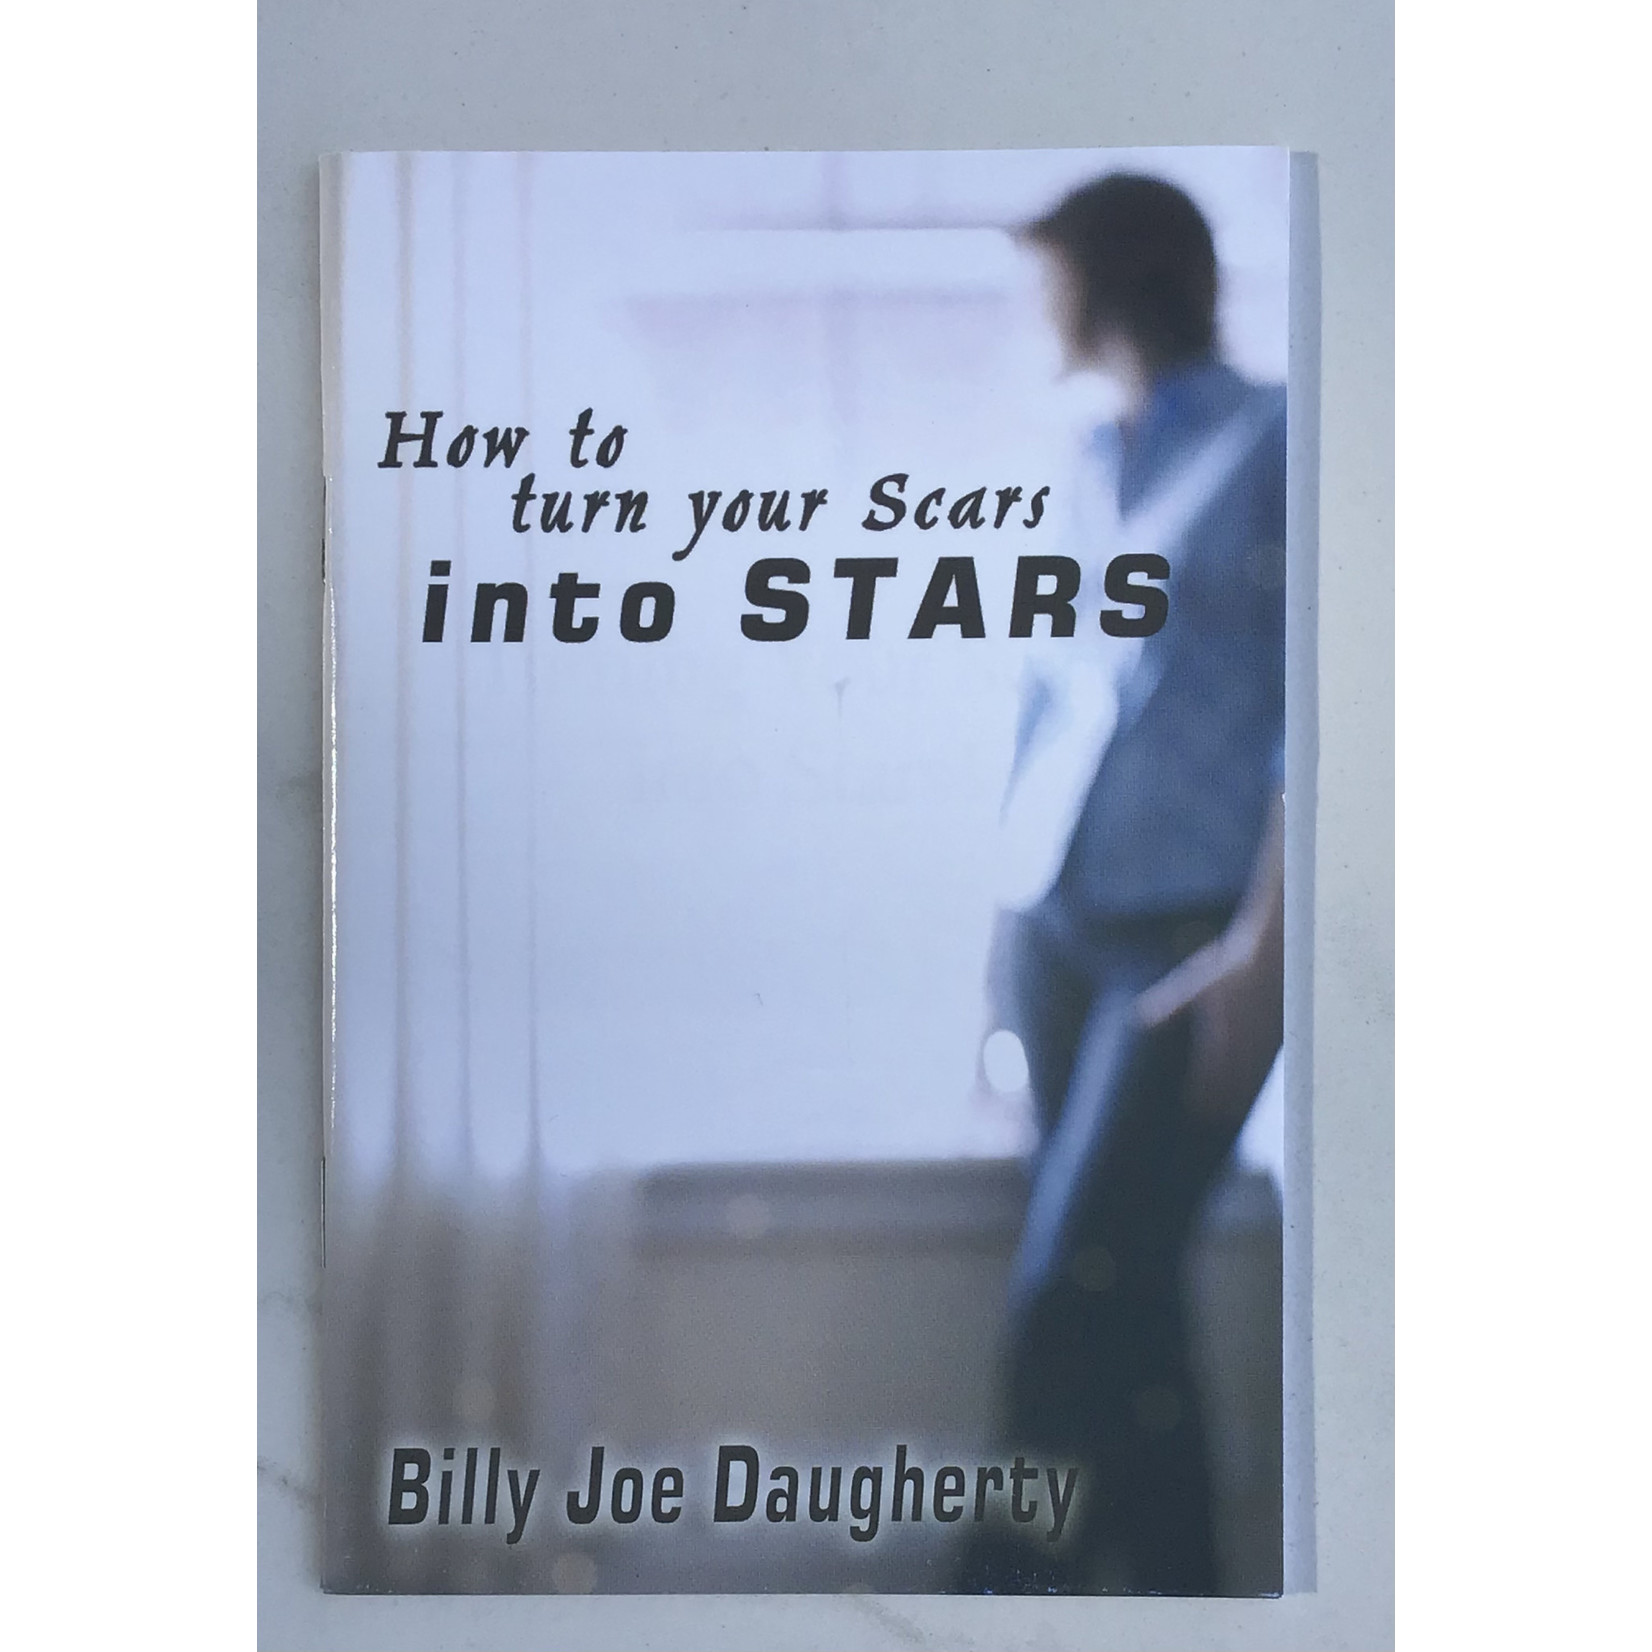 How To Turn Your Scars Into Stars - DAUGHERTY, BILLY JOE